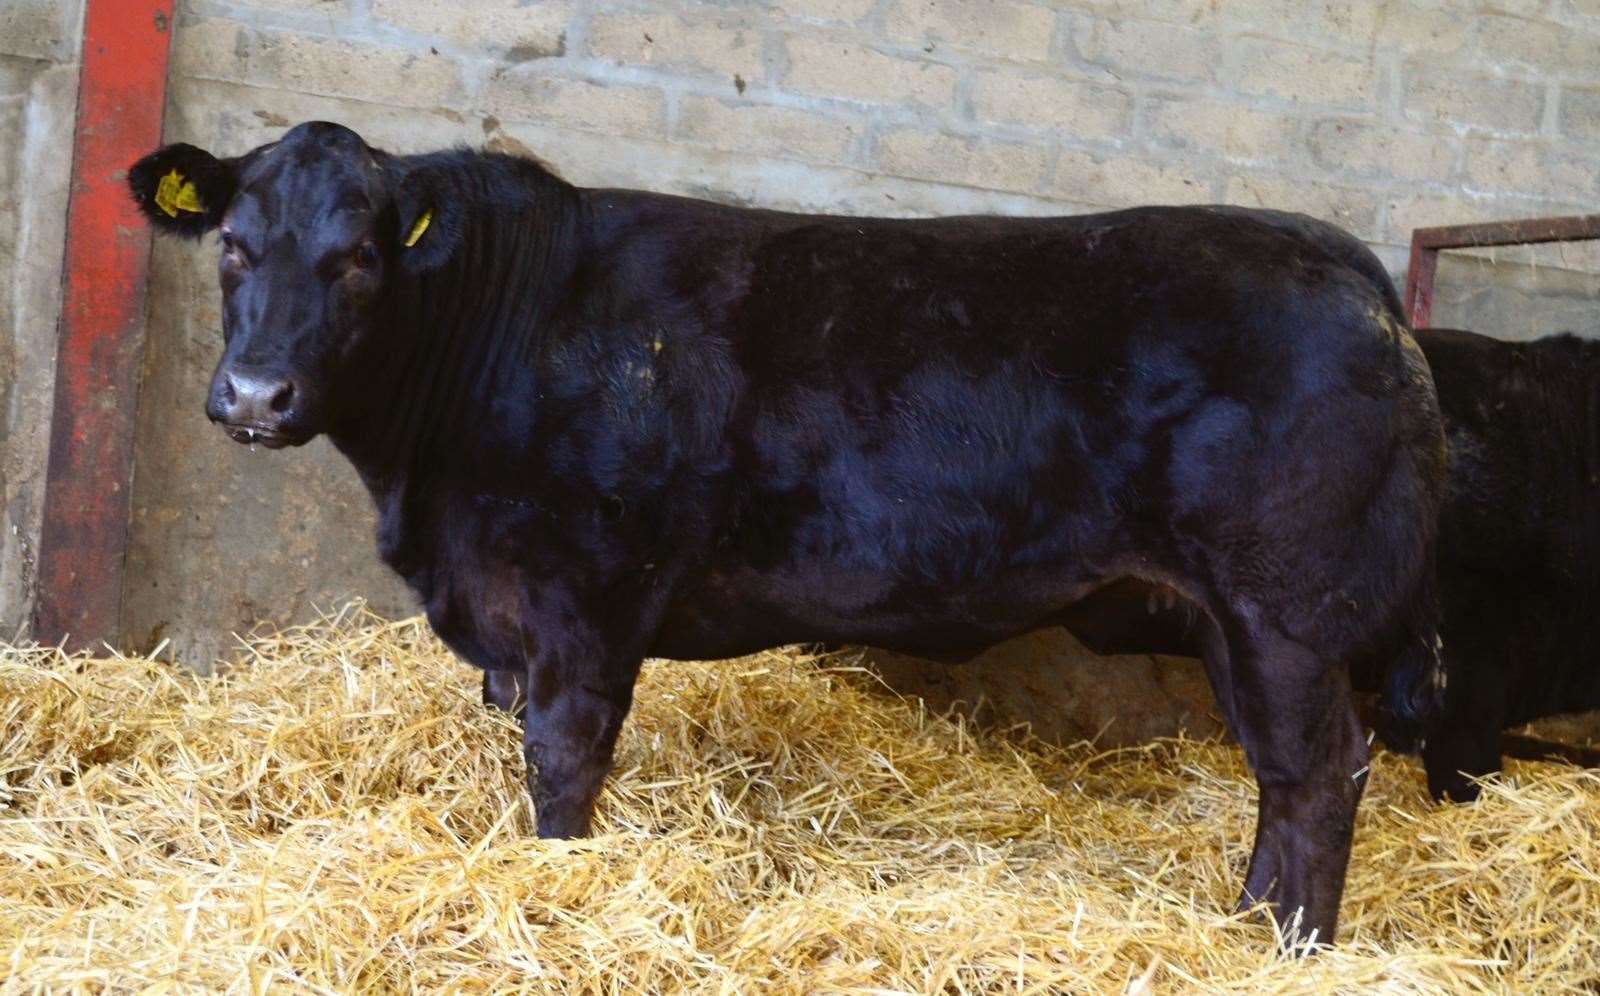 Sale leader at £3900 was a 21-month-old Limousin cross heifer bred by Guise, Tough, which sold online to Jack Smyth, Northern Ireland.